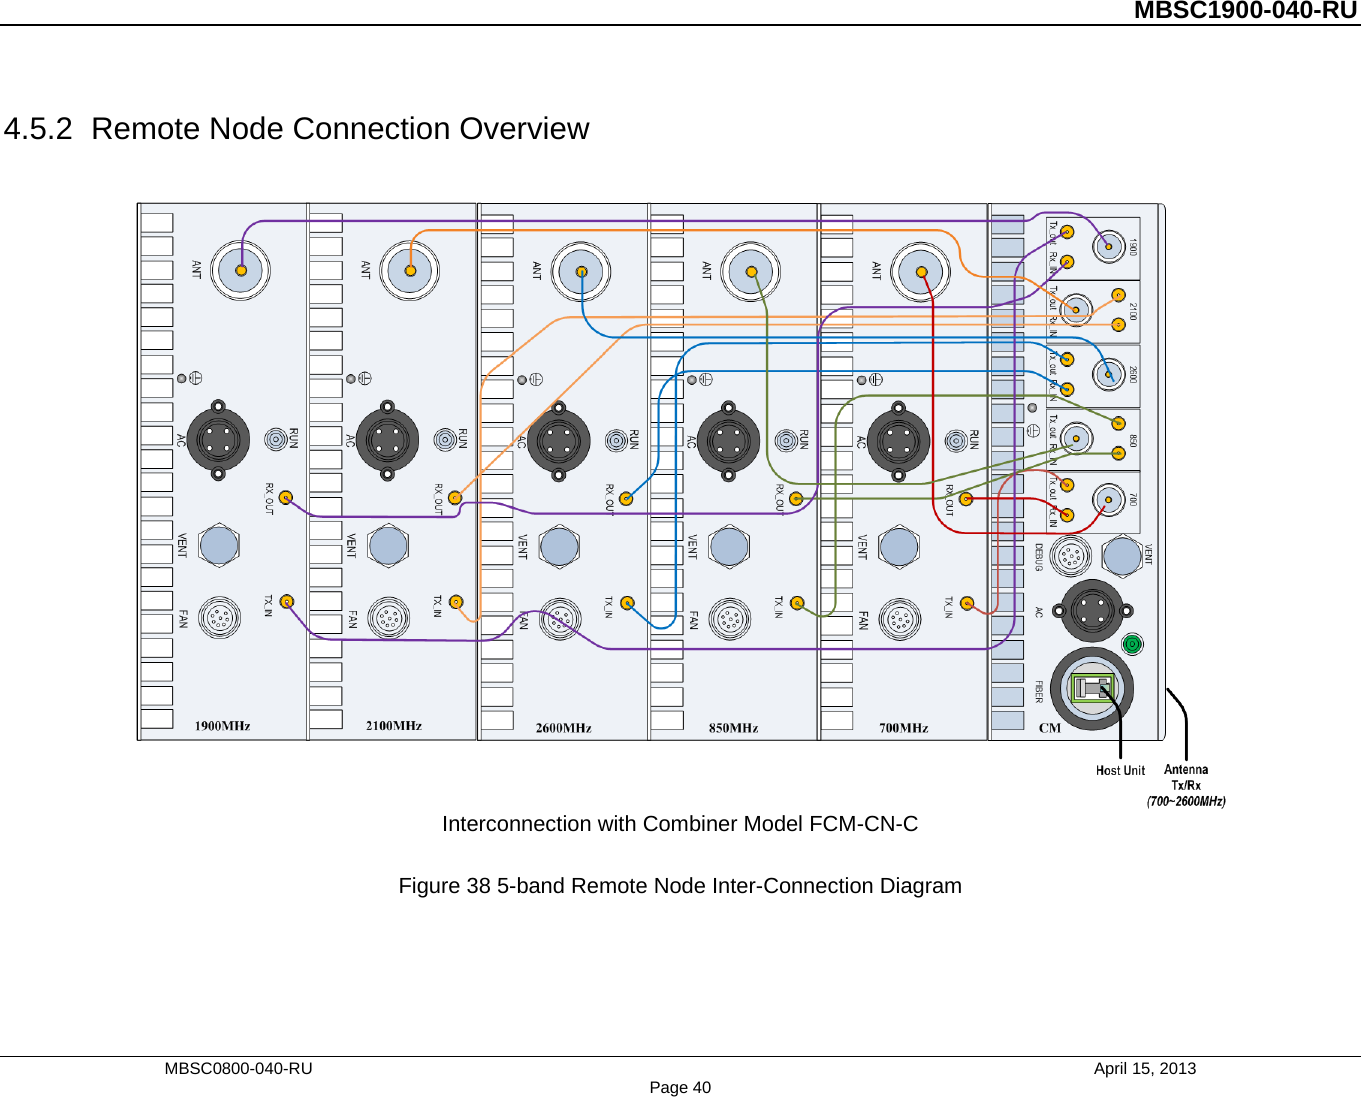          MBSC1900-040-RU   4.5.2 Remote Node Connection Overview   Interconnection with Combiner Model FCM-CN-C  Figure 38 5-band Remote Node Inter-Connection Diagram  MBSC0800-040-RU                                      April 15, 2013 Page 40 